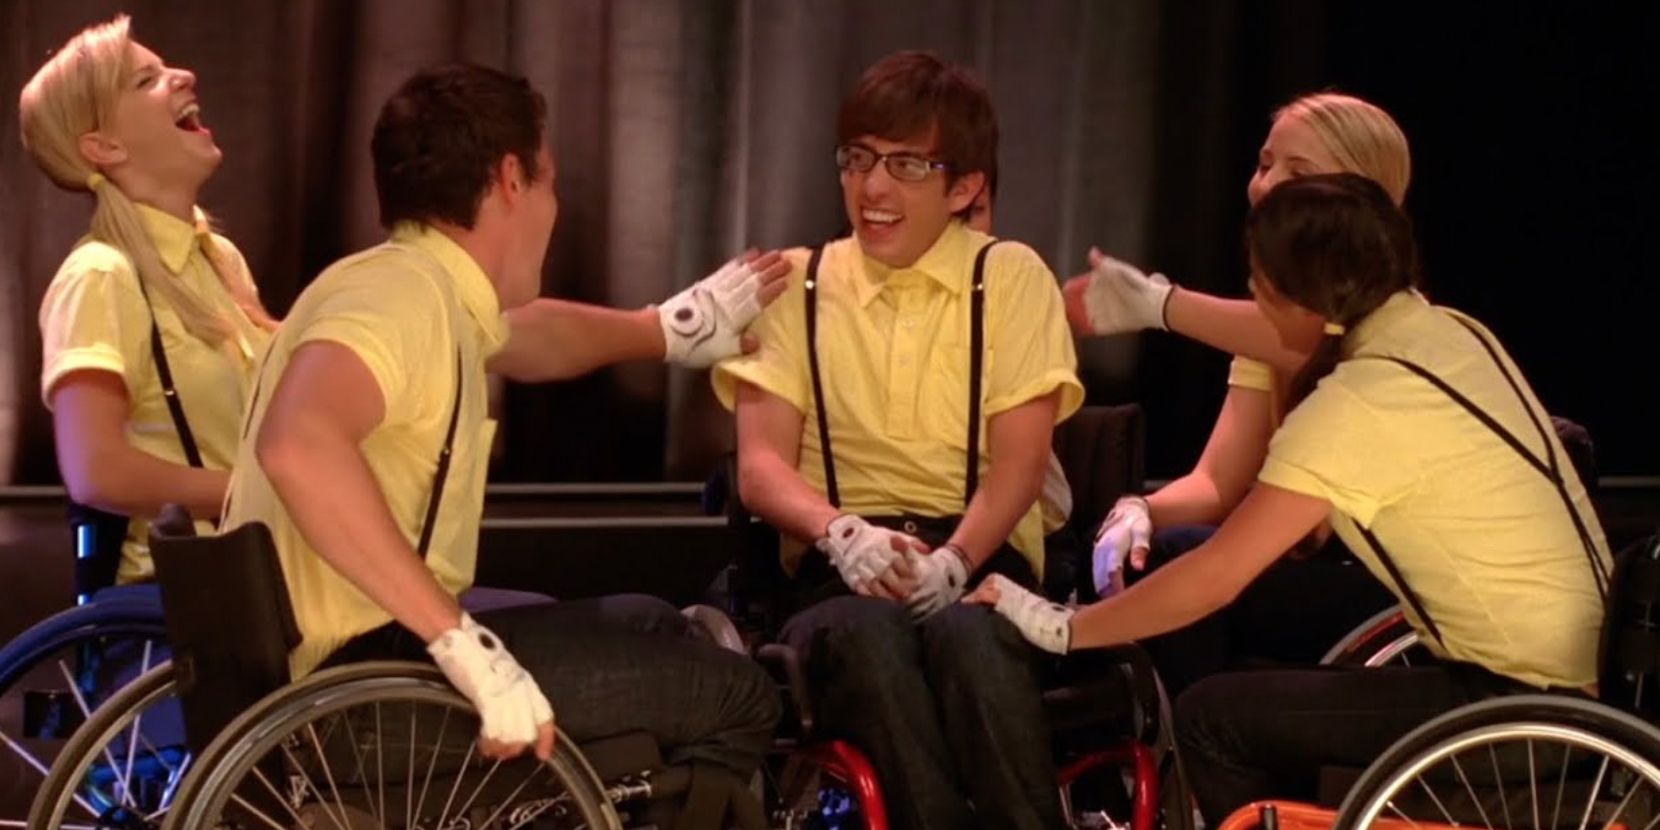 Club members surround Artie after performing &quot;Proud Mary&quot; in wheelchairs in Wheels S1E09